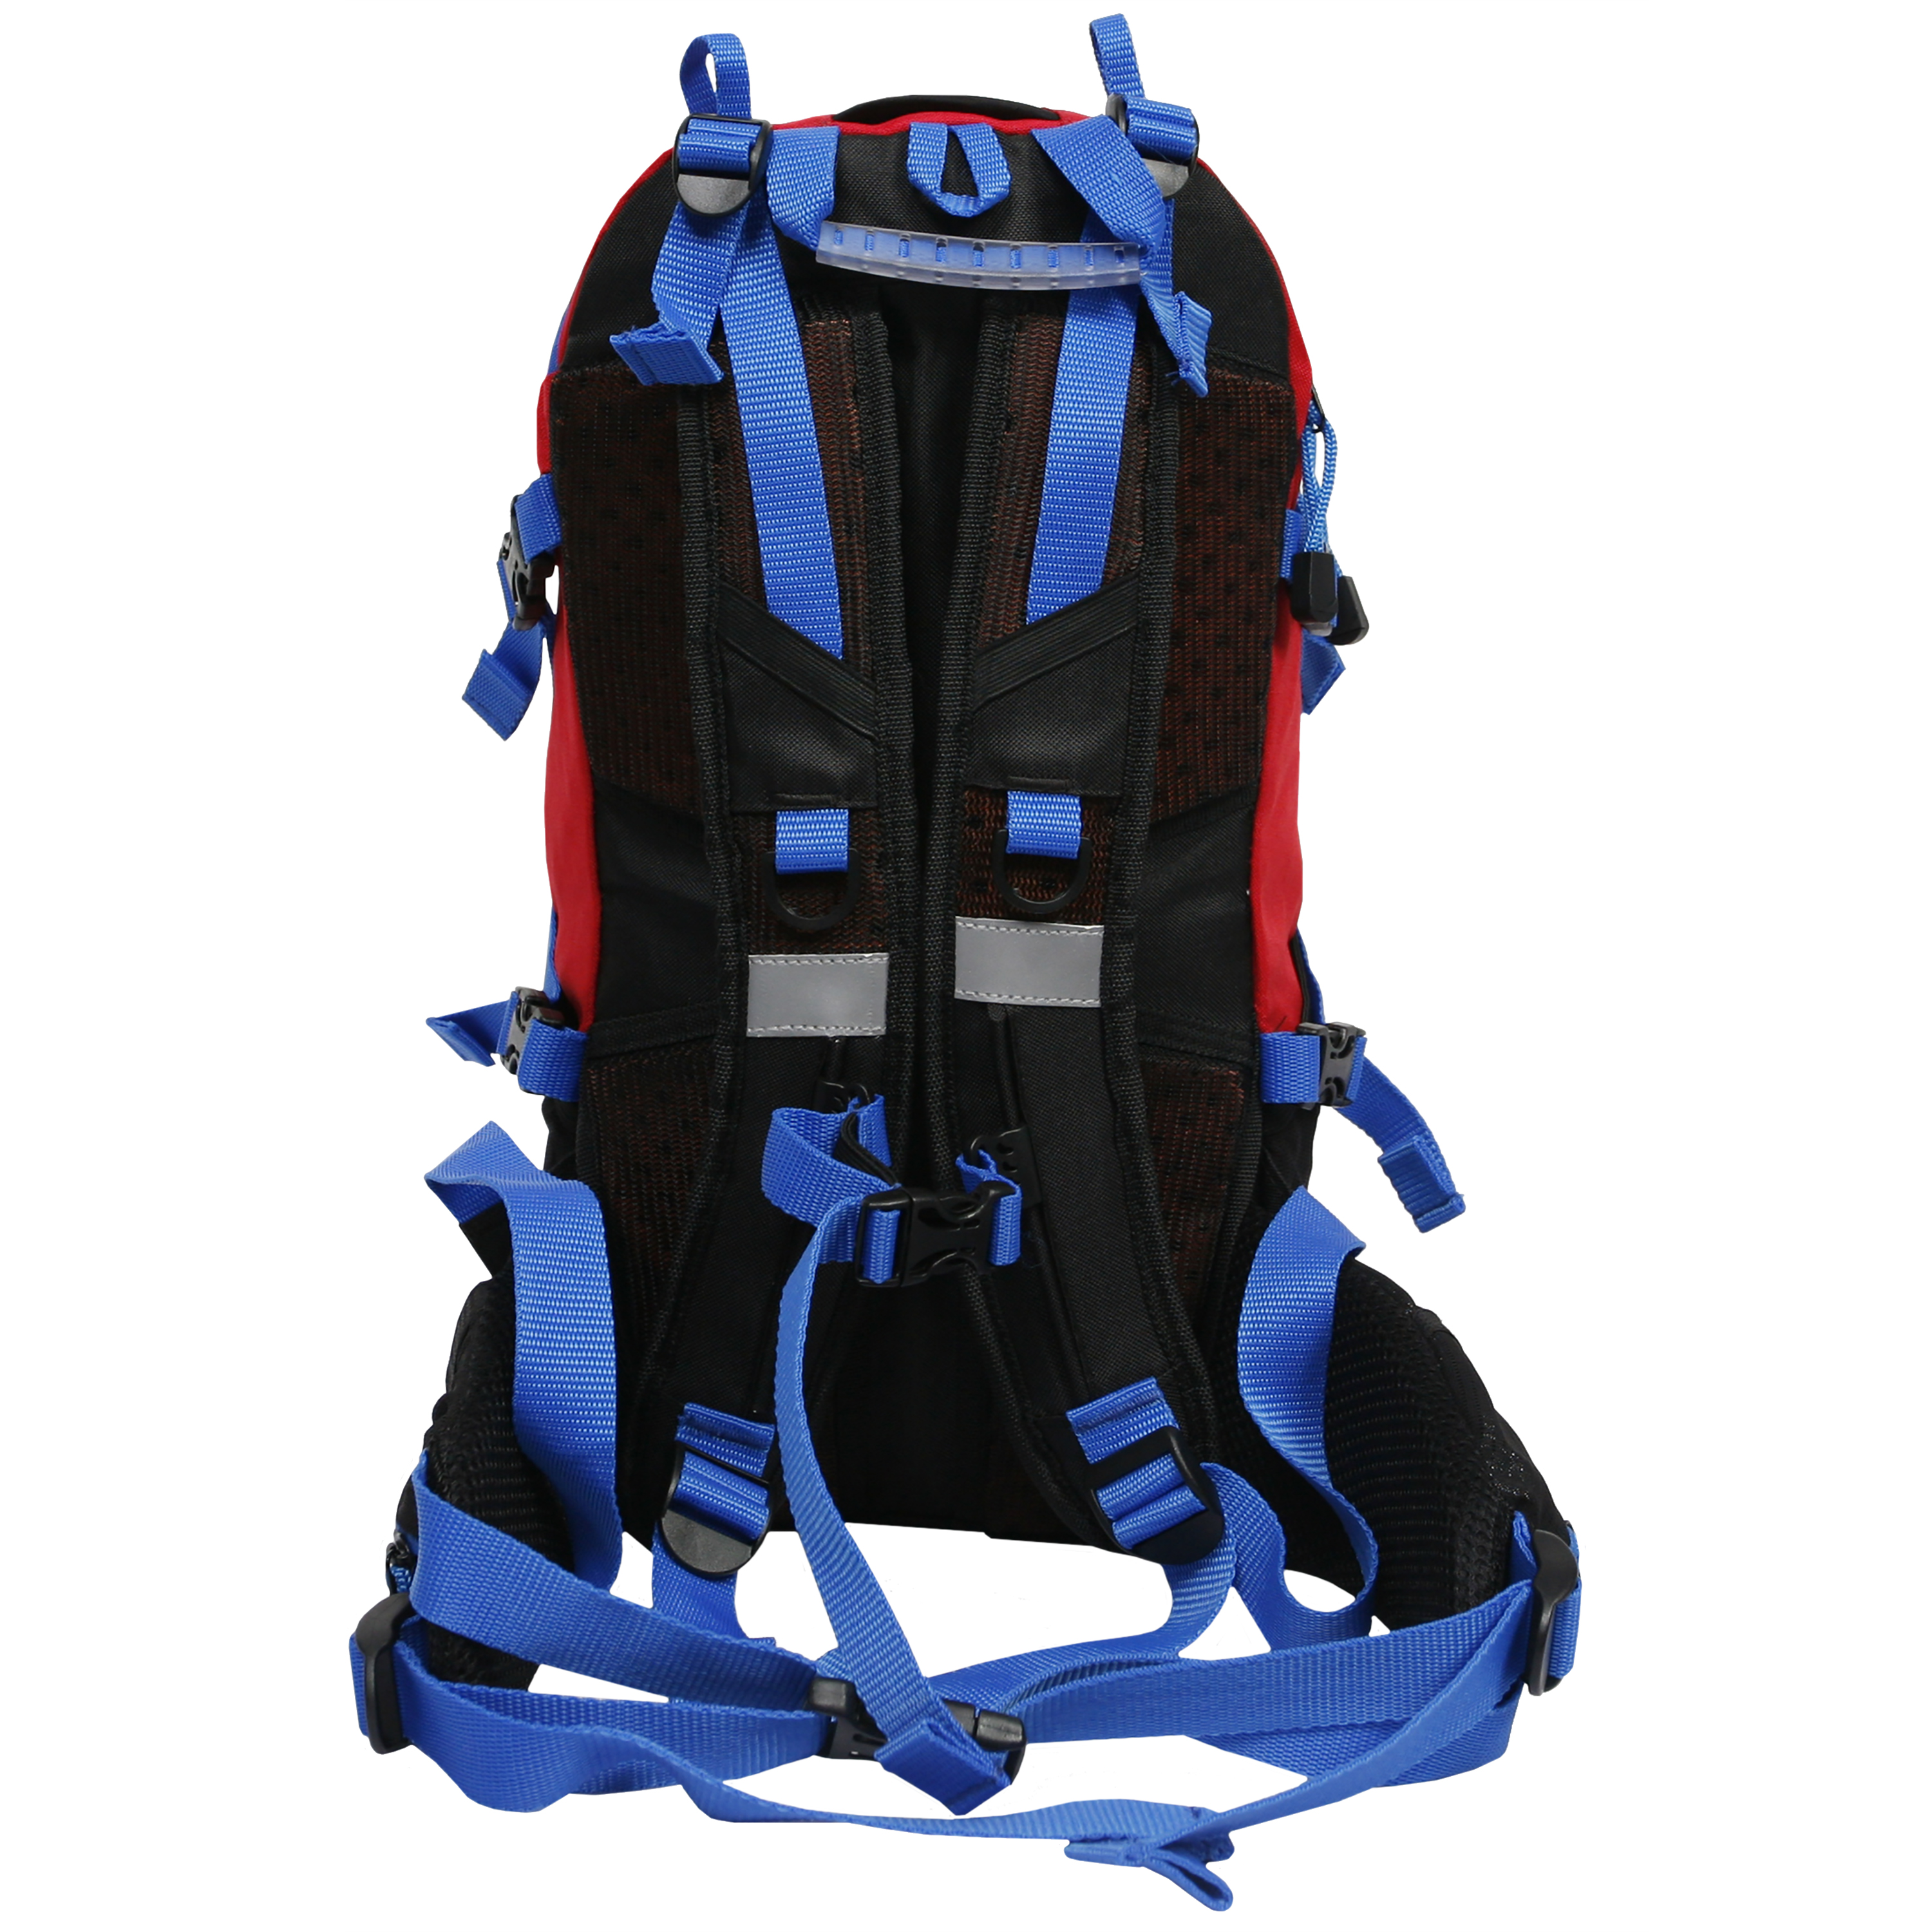 Ozark Trail 17-Liter Blanchard Springs Hydration Backpack with Hydration Reservoir, Red - image 3 of 4